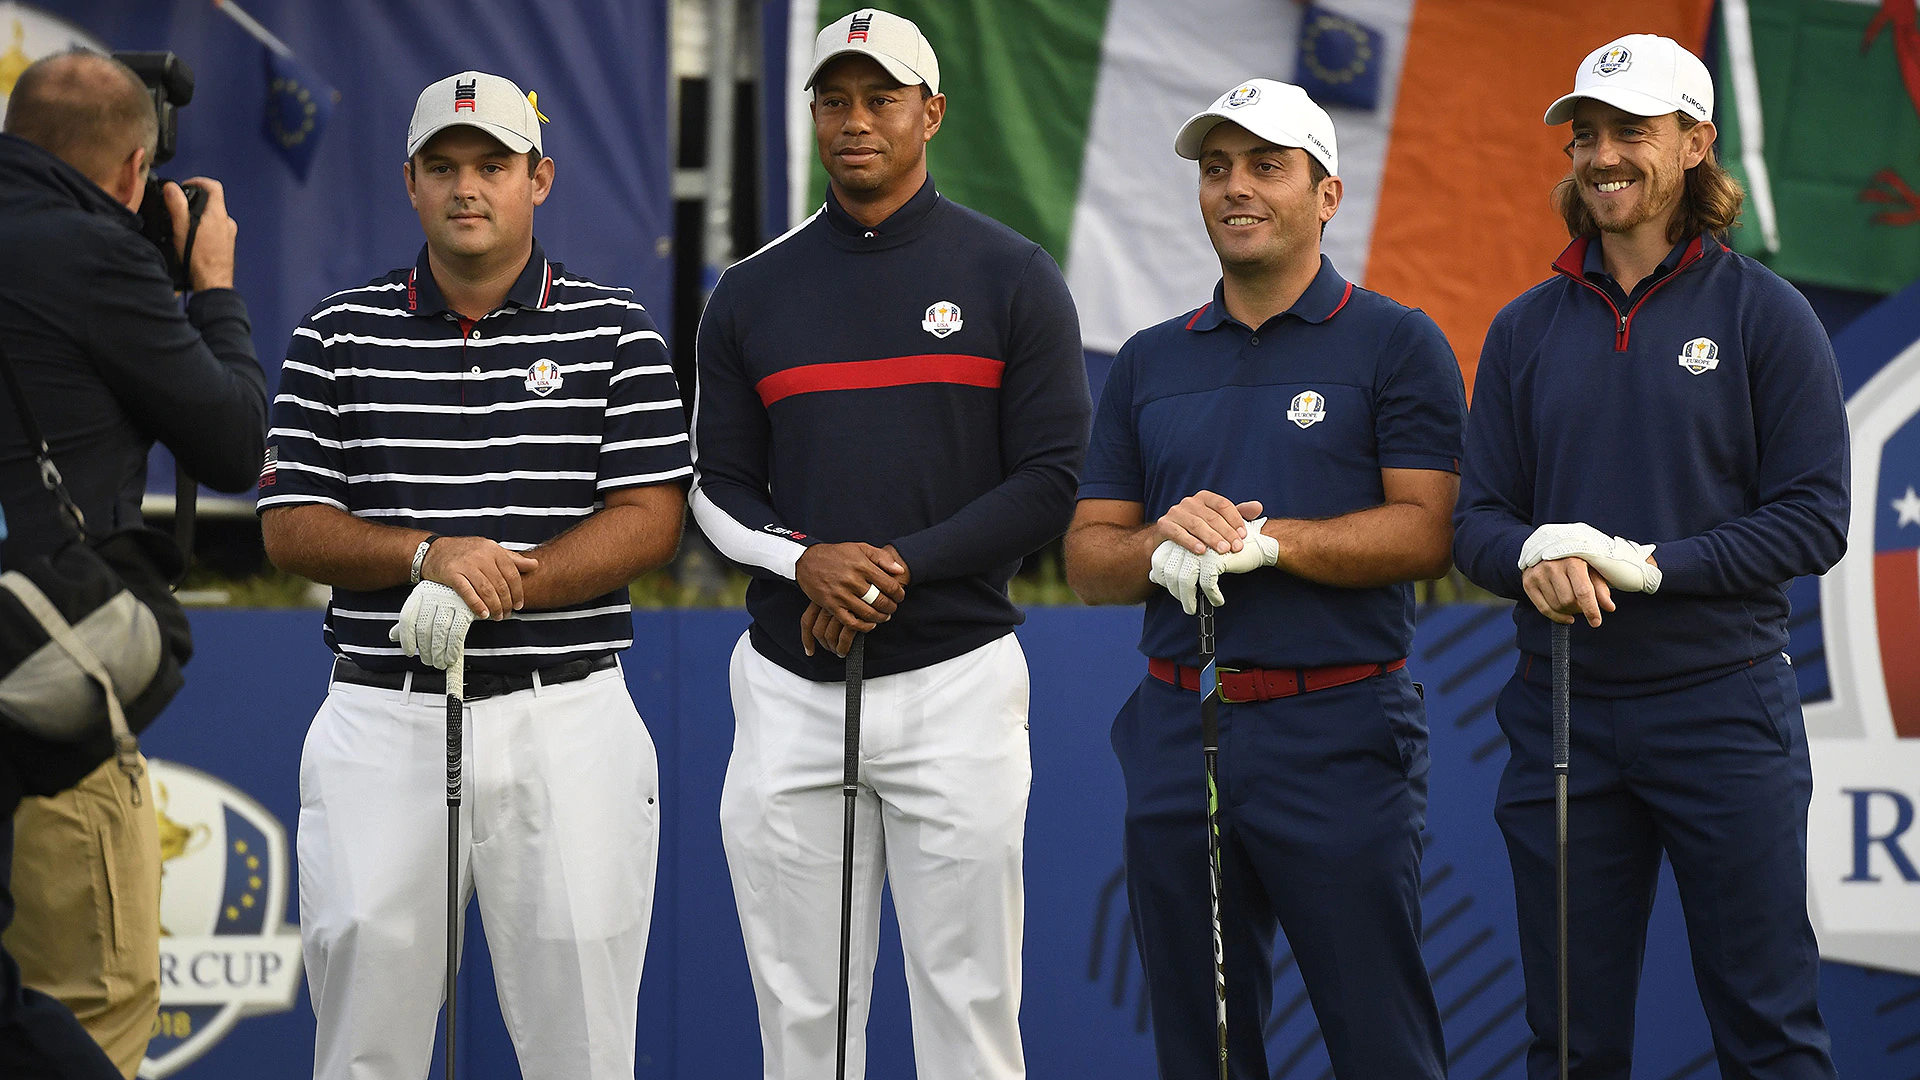 Day 2 fourball pairings: U.S. goes with same lineup